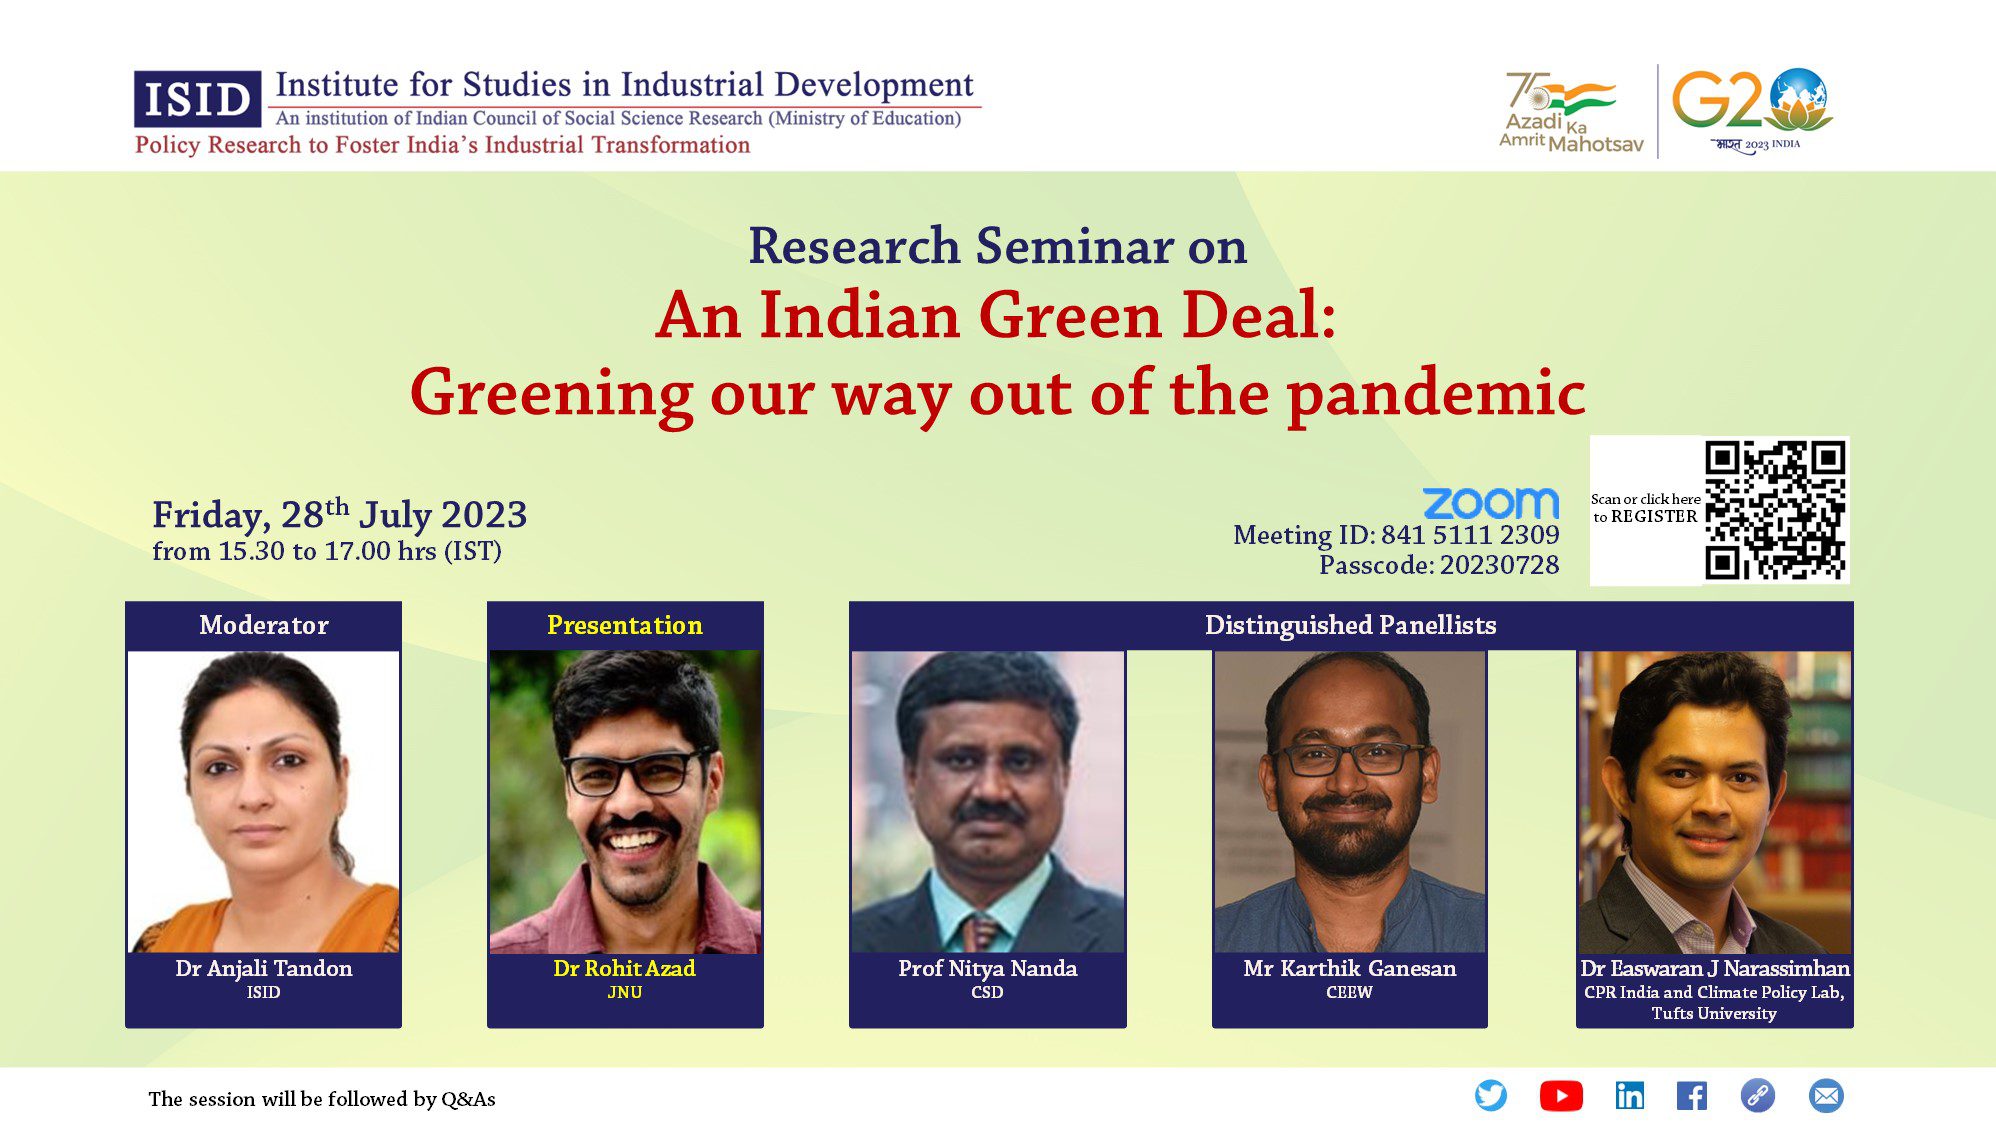 Research Seminar on An Indian Green Deal: Greening our way out of the pandemic